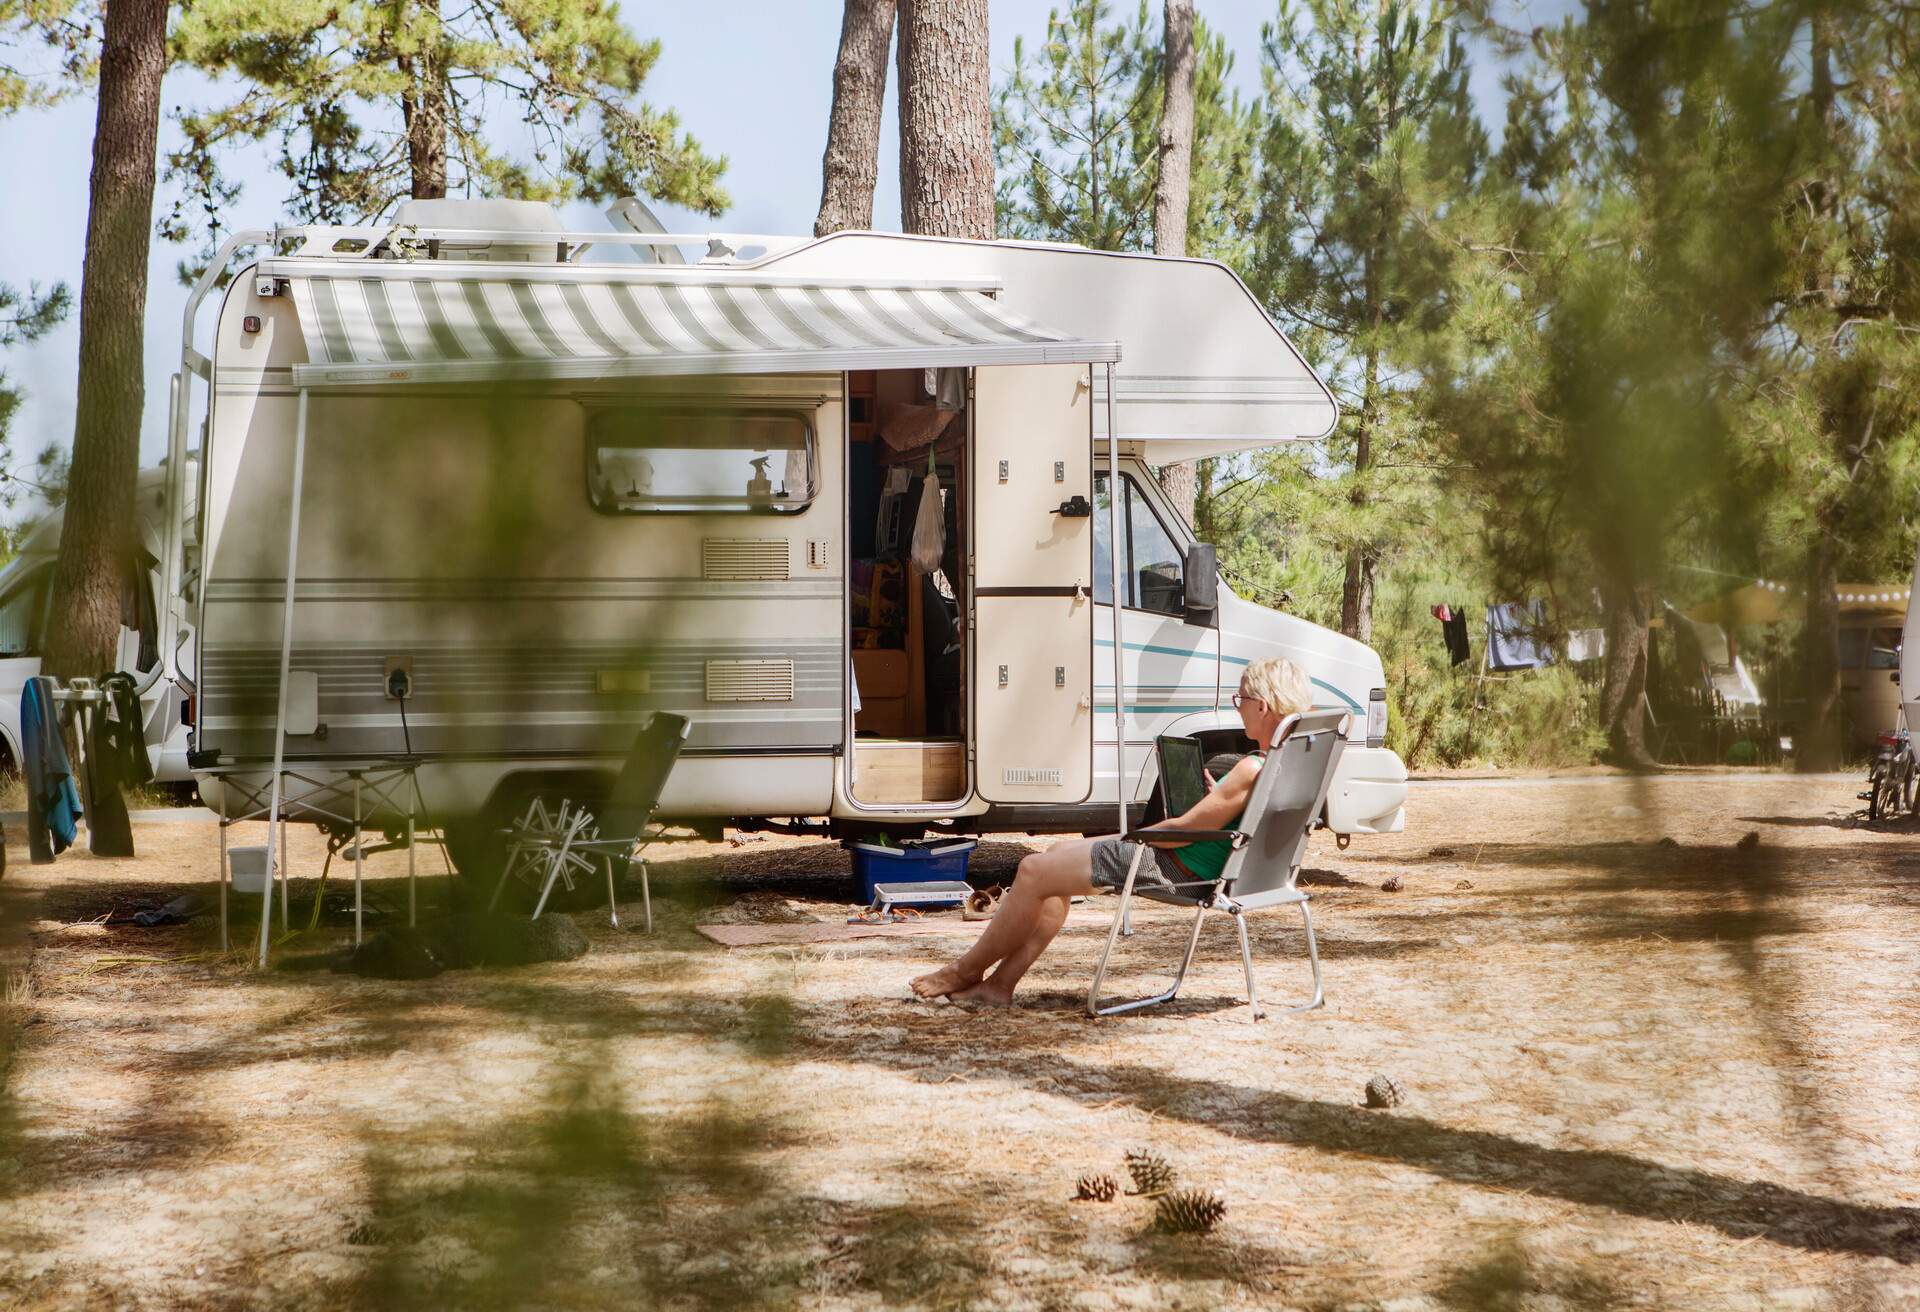 A woman using a tablet while sitting on a folding chair next to a motorhome.